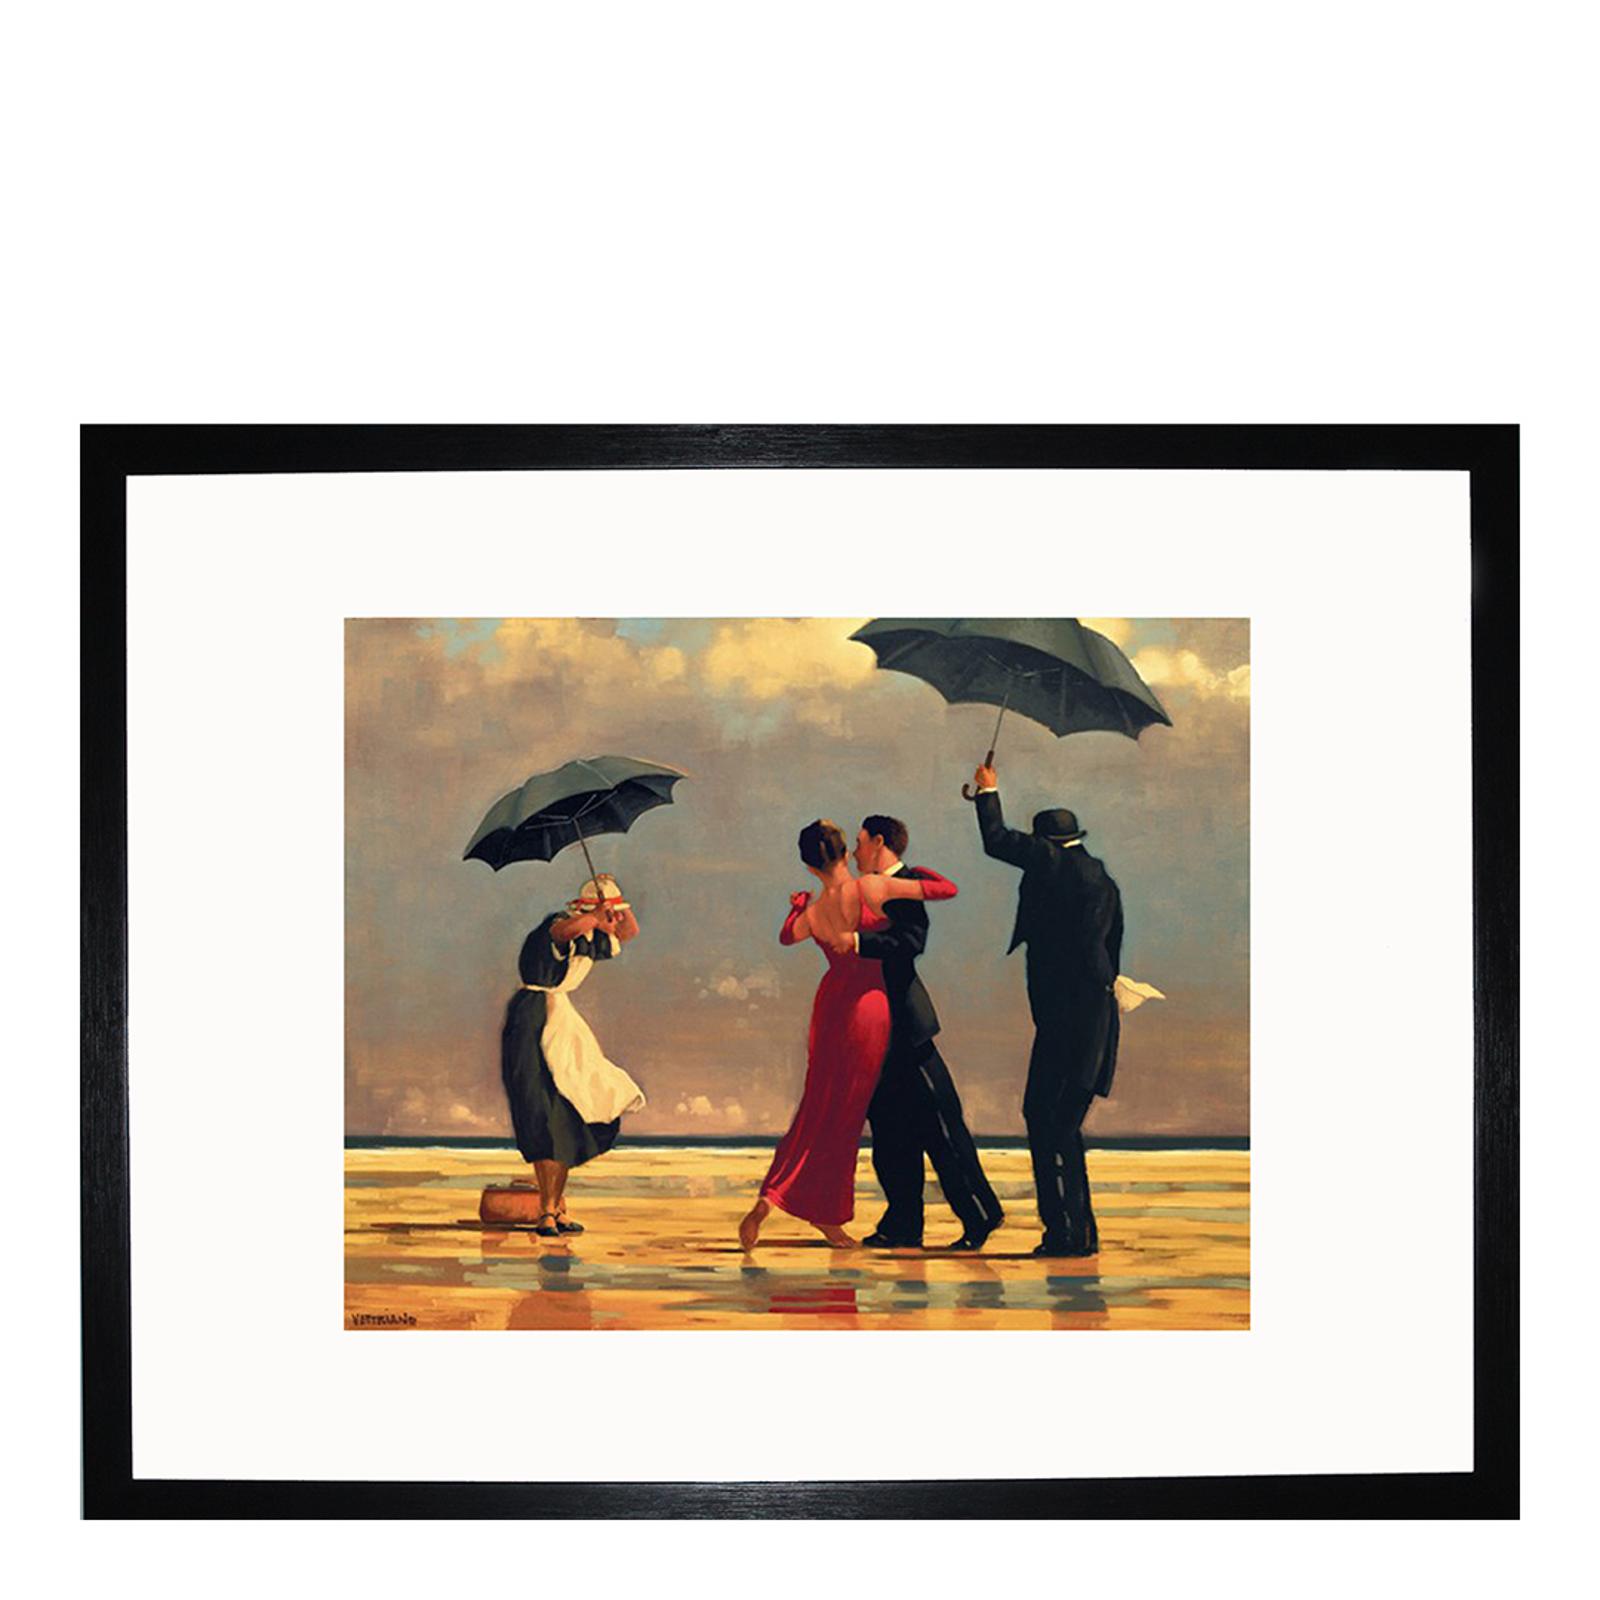 The Singing Butler, by Jack Vettriano 35.6x28cm - BrandAlley